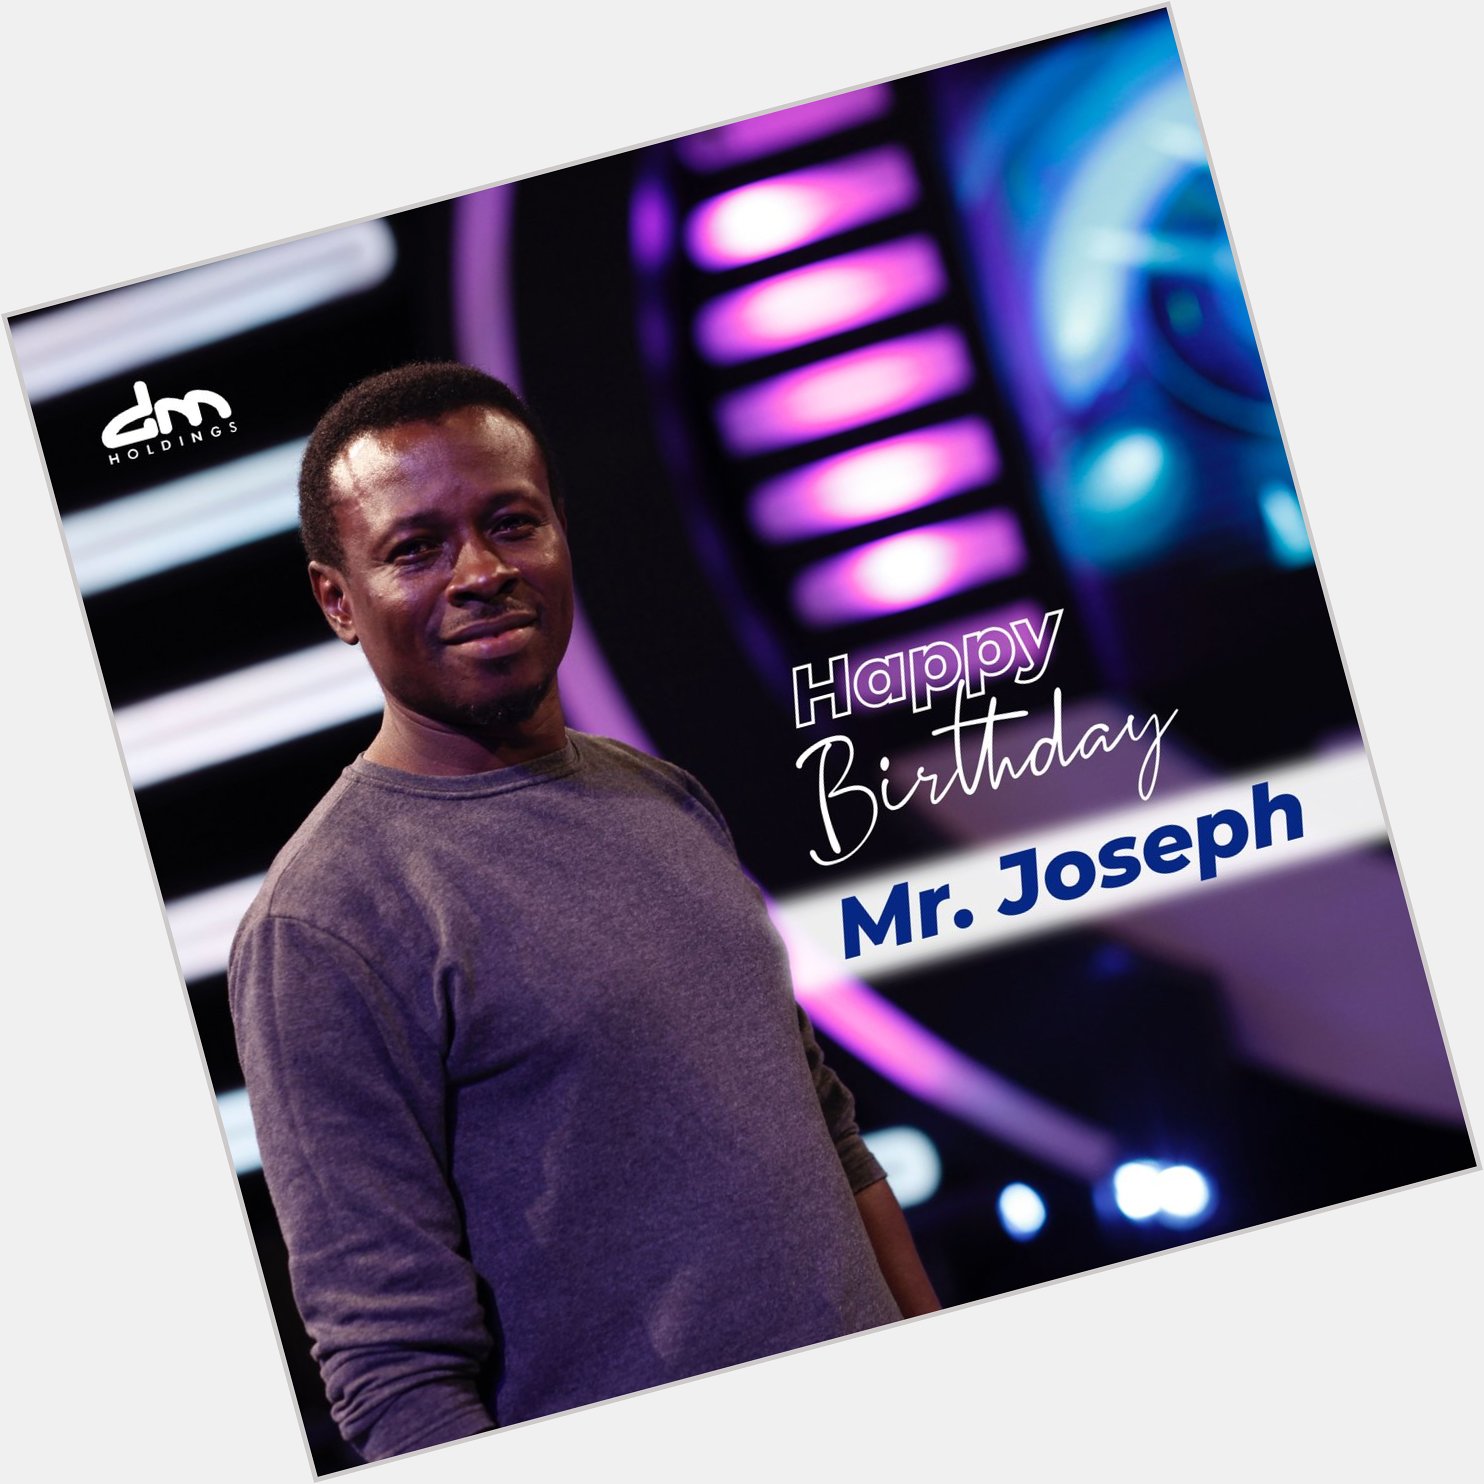 Happy birthday Mr. Joseph! May the world be blessed with many more years of your presences. 